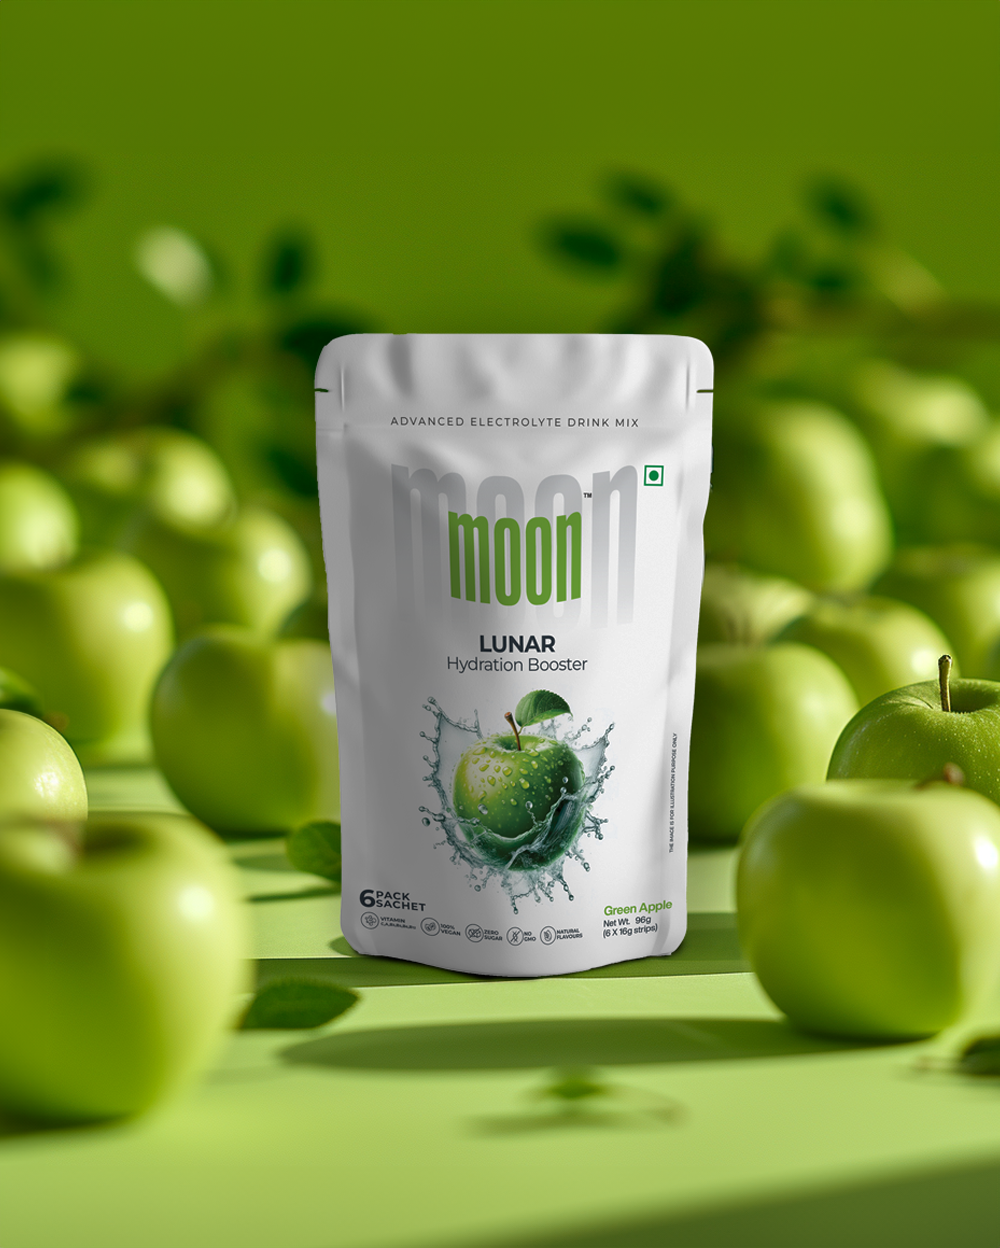 A pouch of MOONFREEZE FOODS PRIVATE LIMITED's Moon Lunar Green Apple + Blueberry Hydration Booster surrounded by green apples on a matching green background.